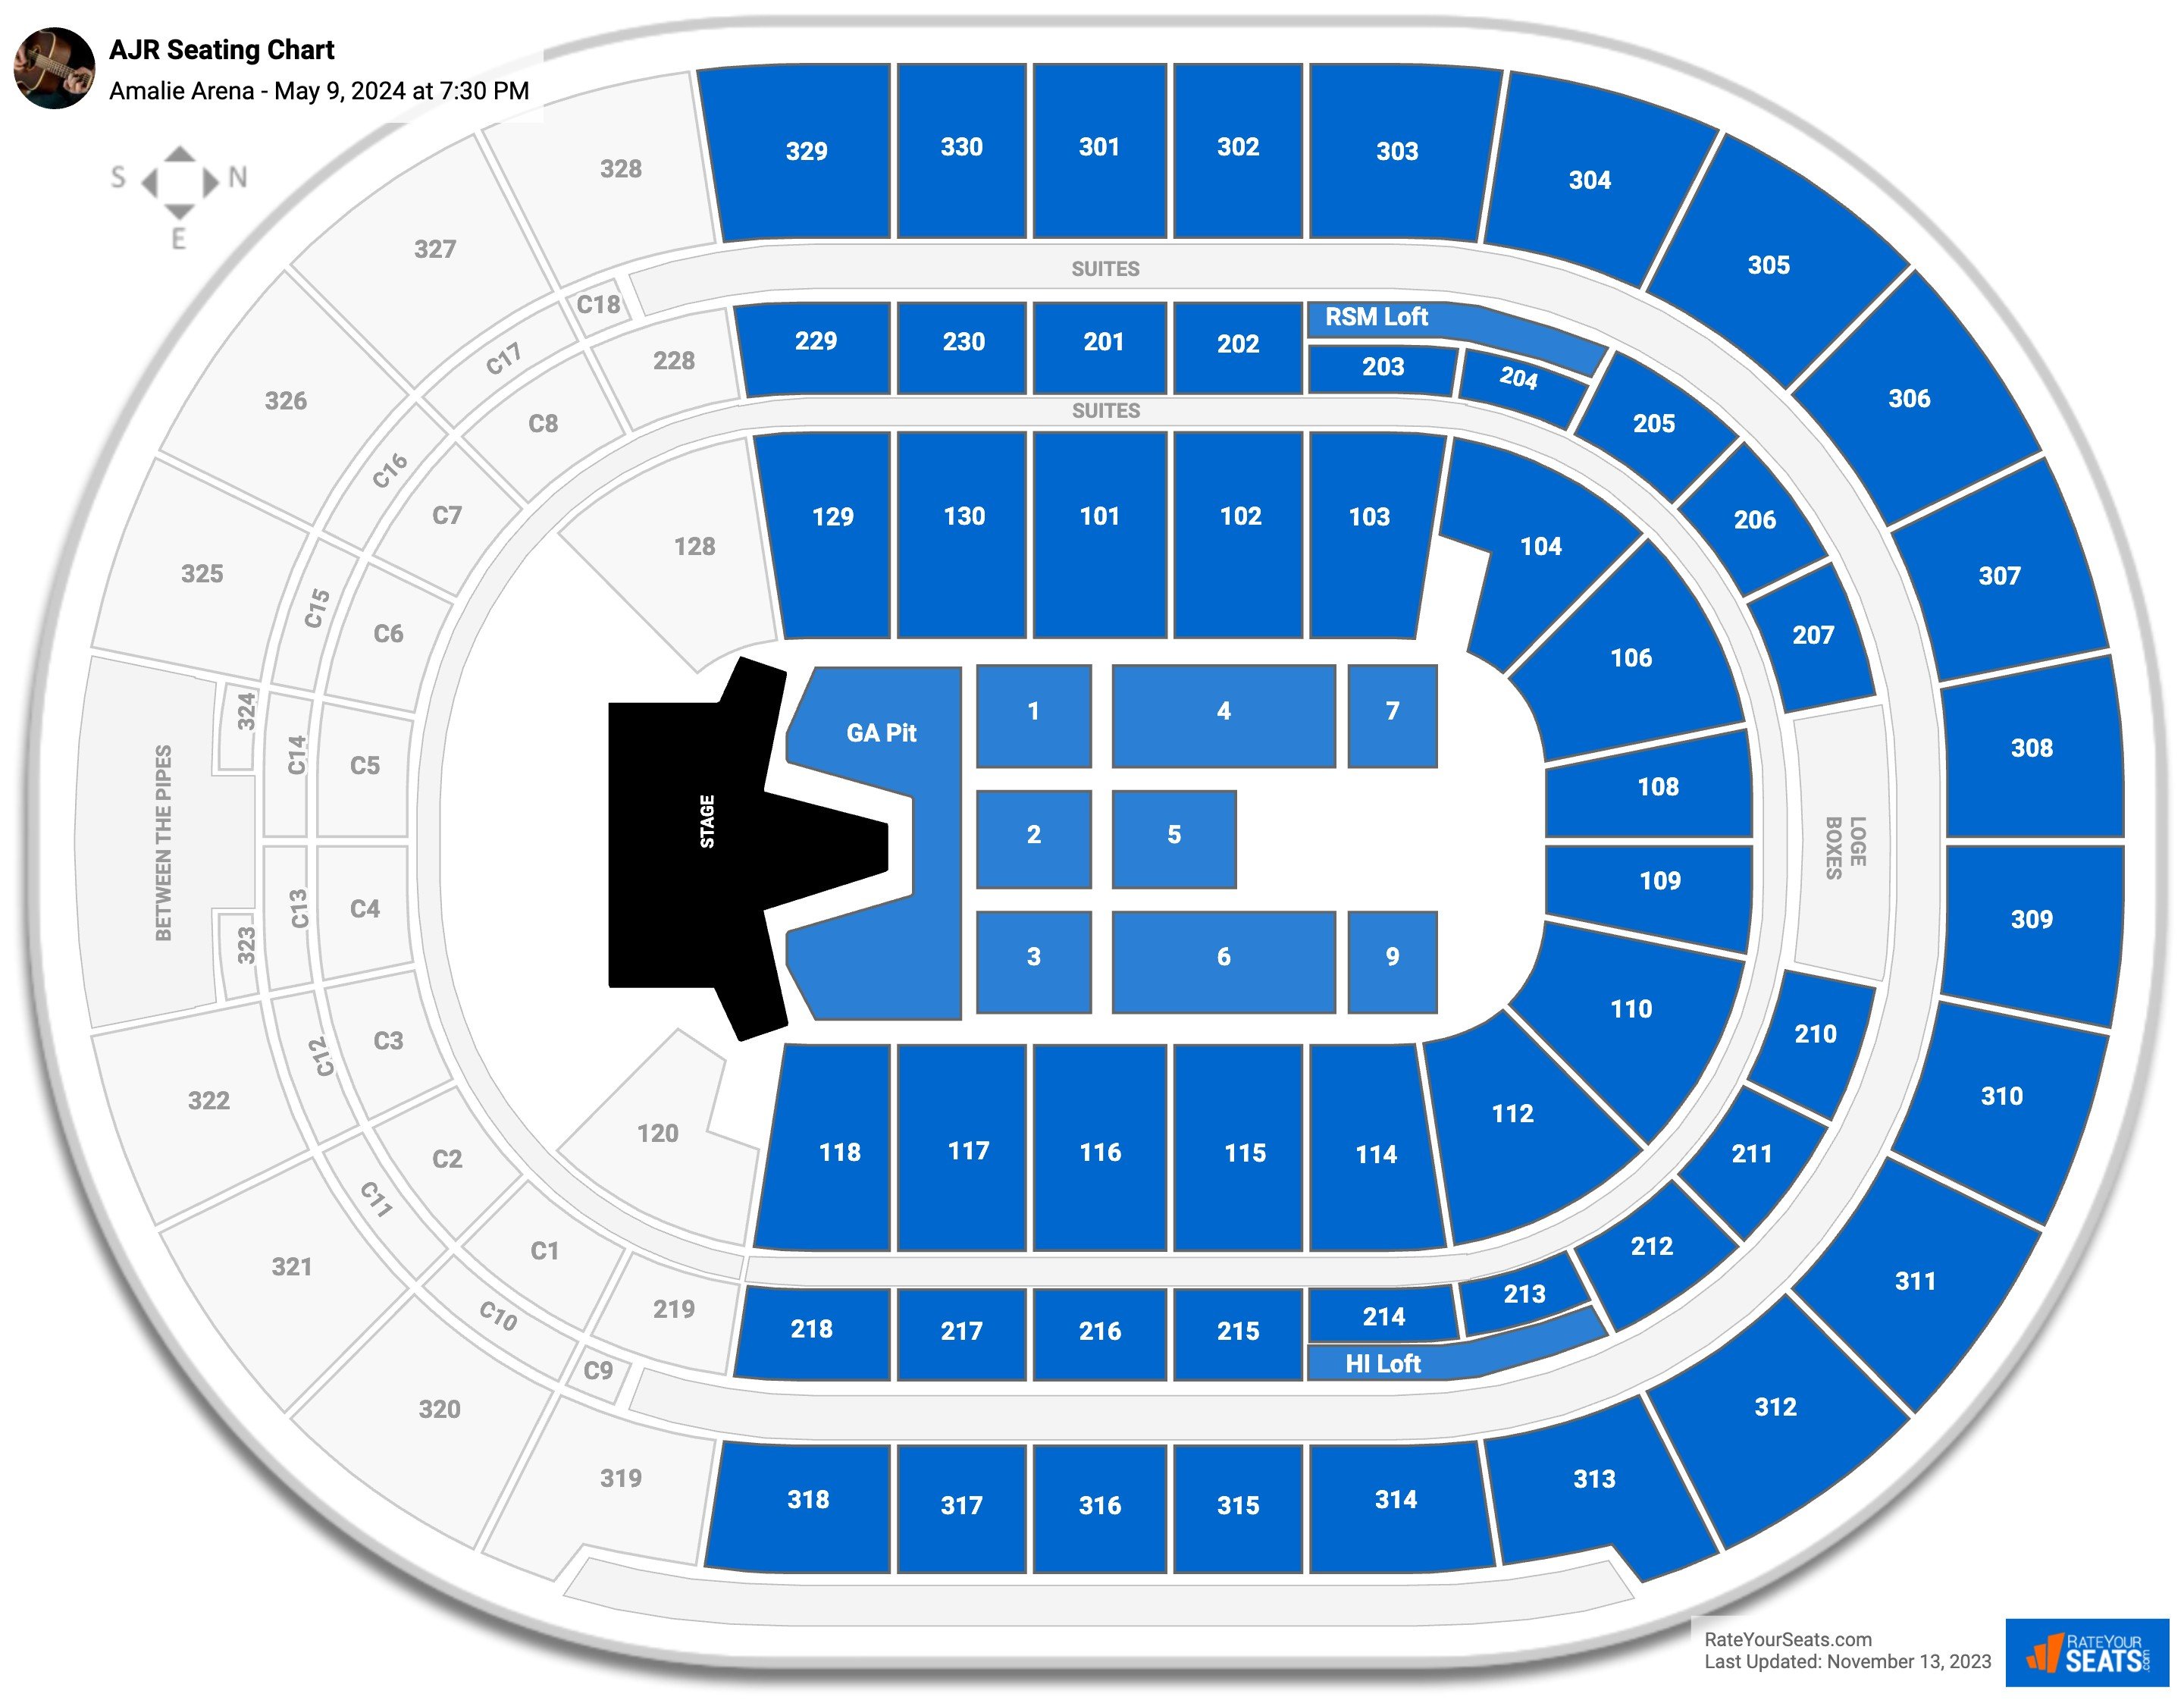 Amalie Arena Concert Seating Chart